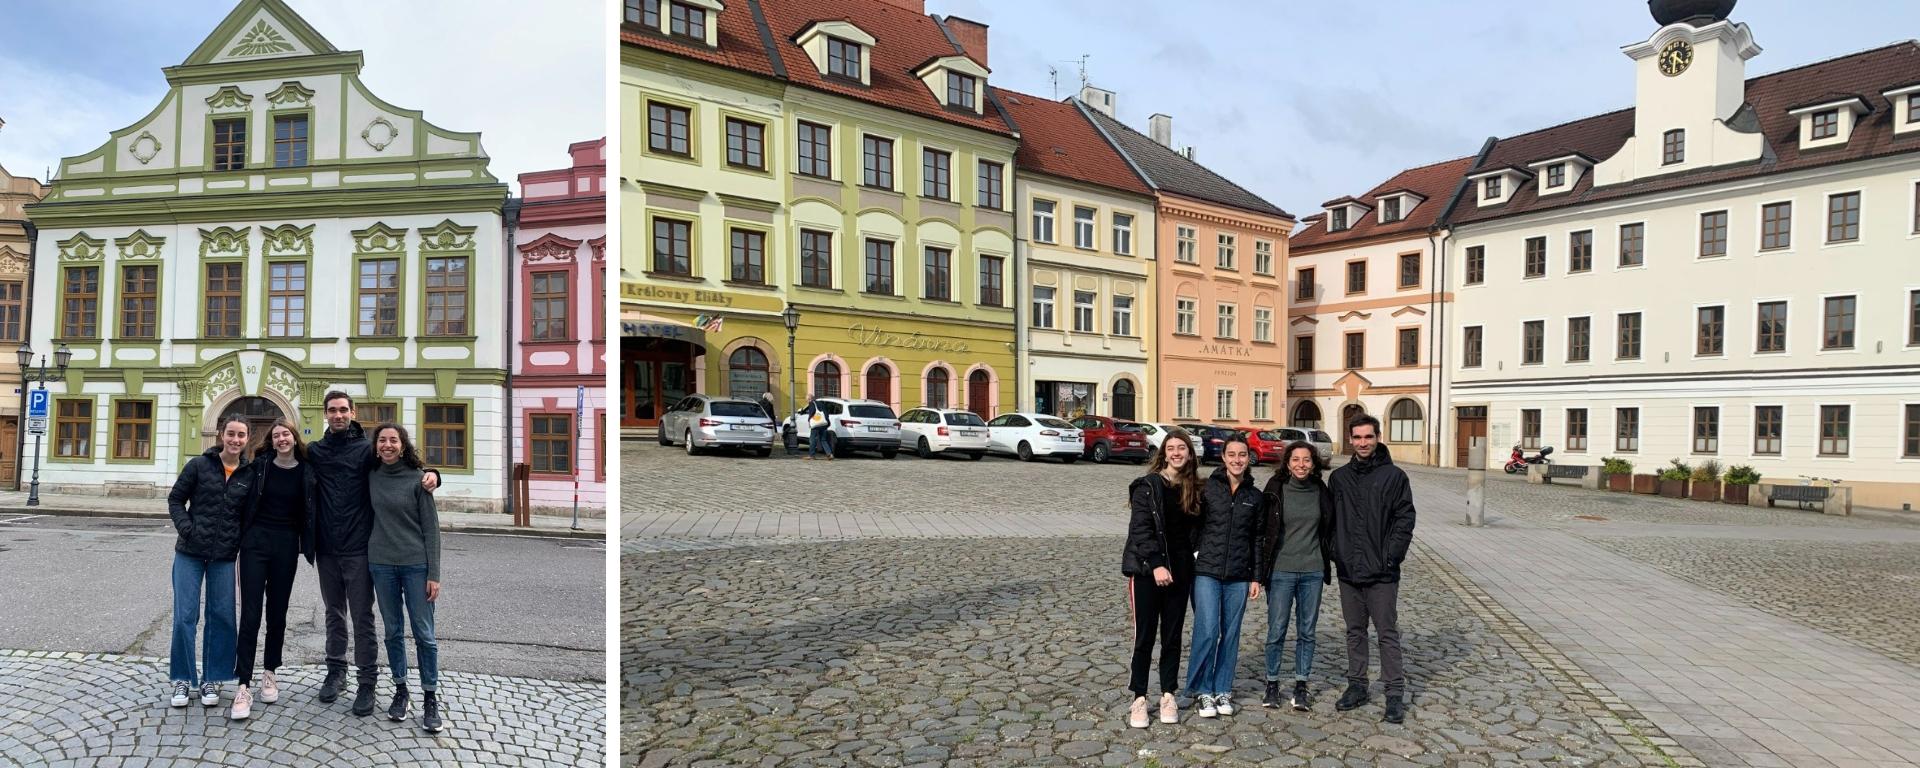 UM professor participates in an Erasmus+ teaching mobility at the University of Hradec Králové in Checz Republic